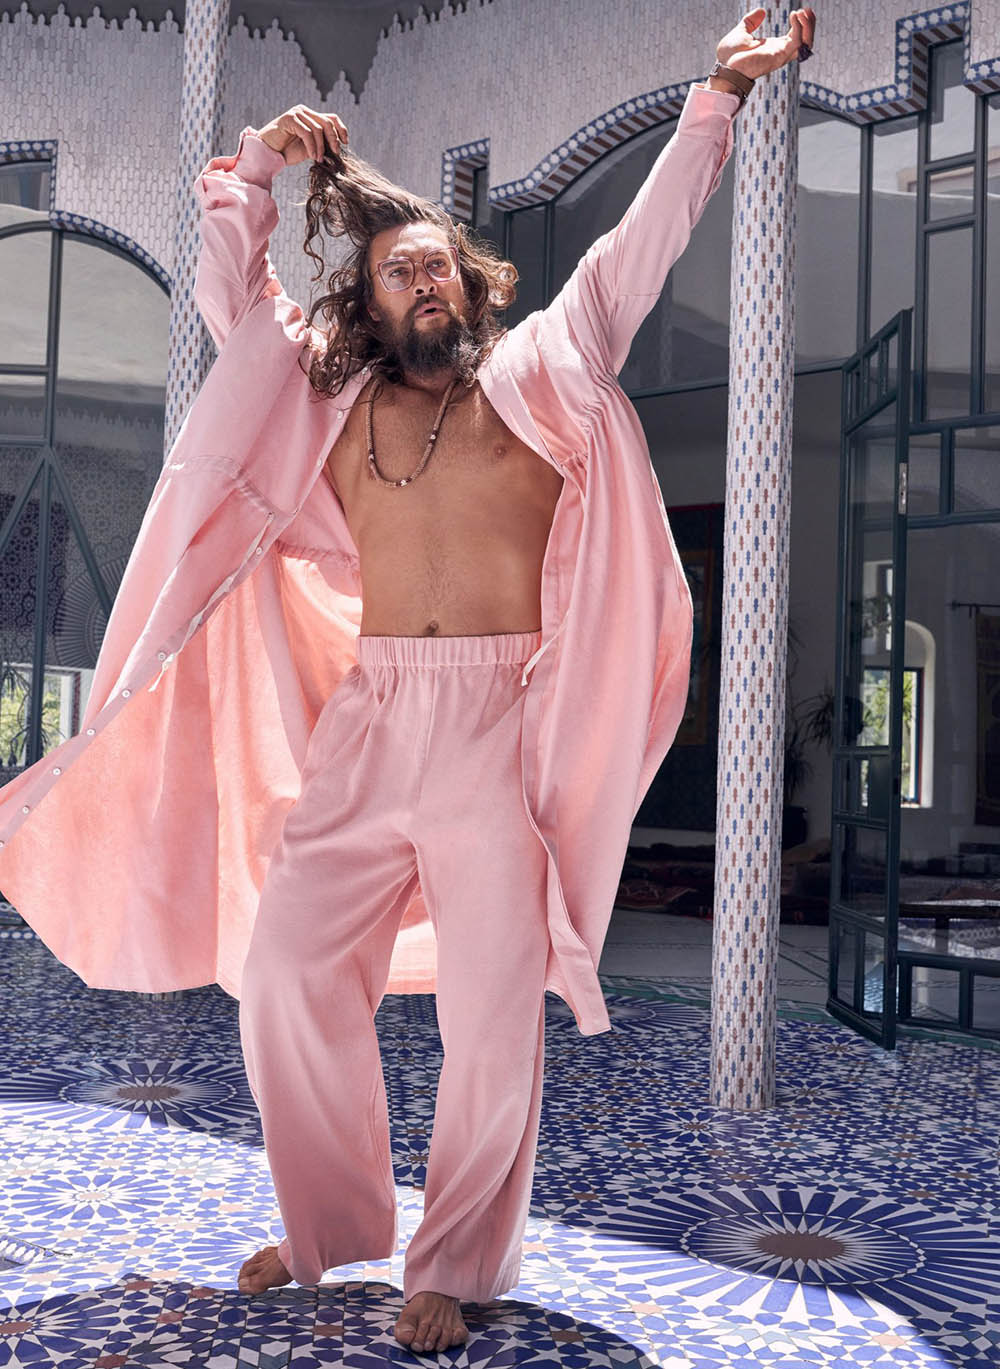 Jason-Momoa-by-Carter-Smith-for-InStyle-US-December-2020-6.jpg